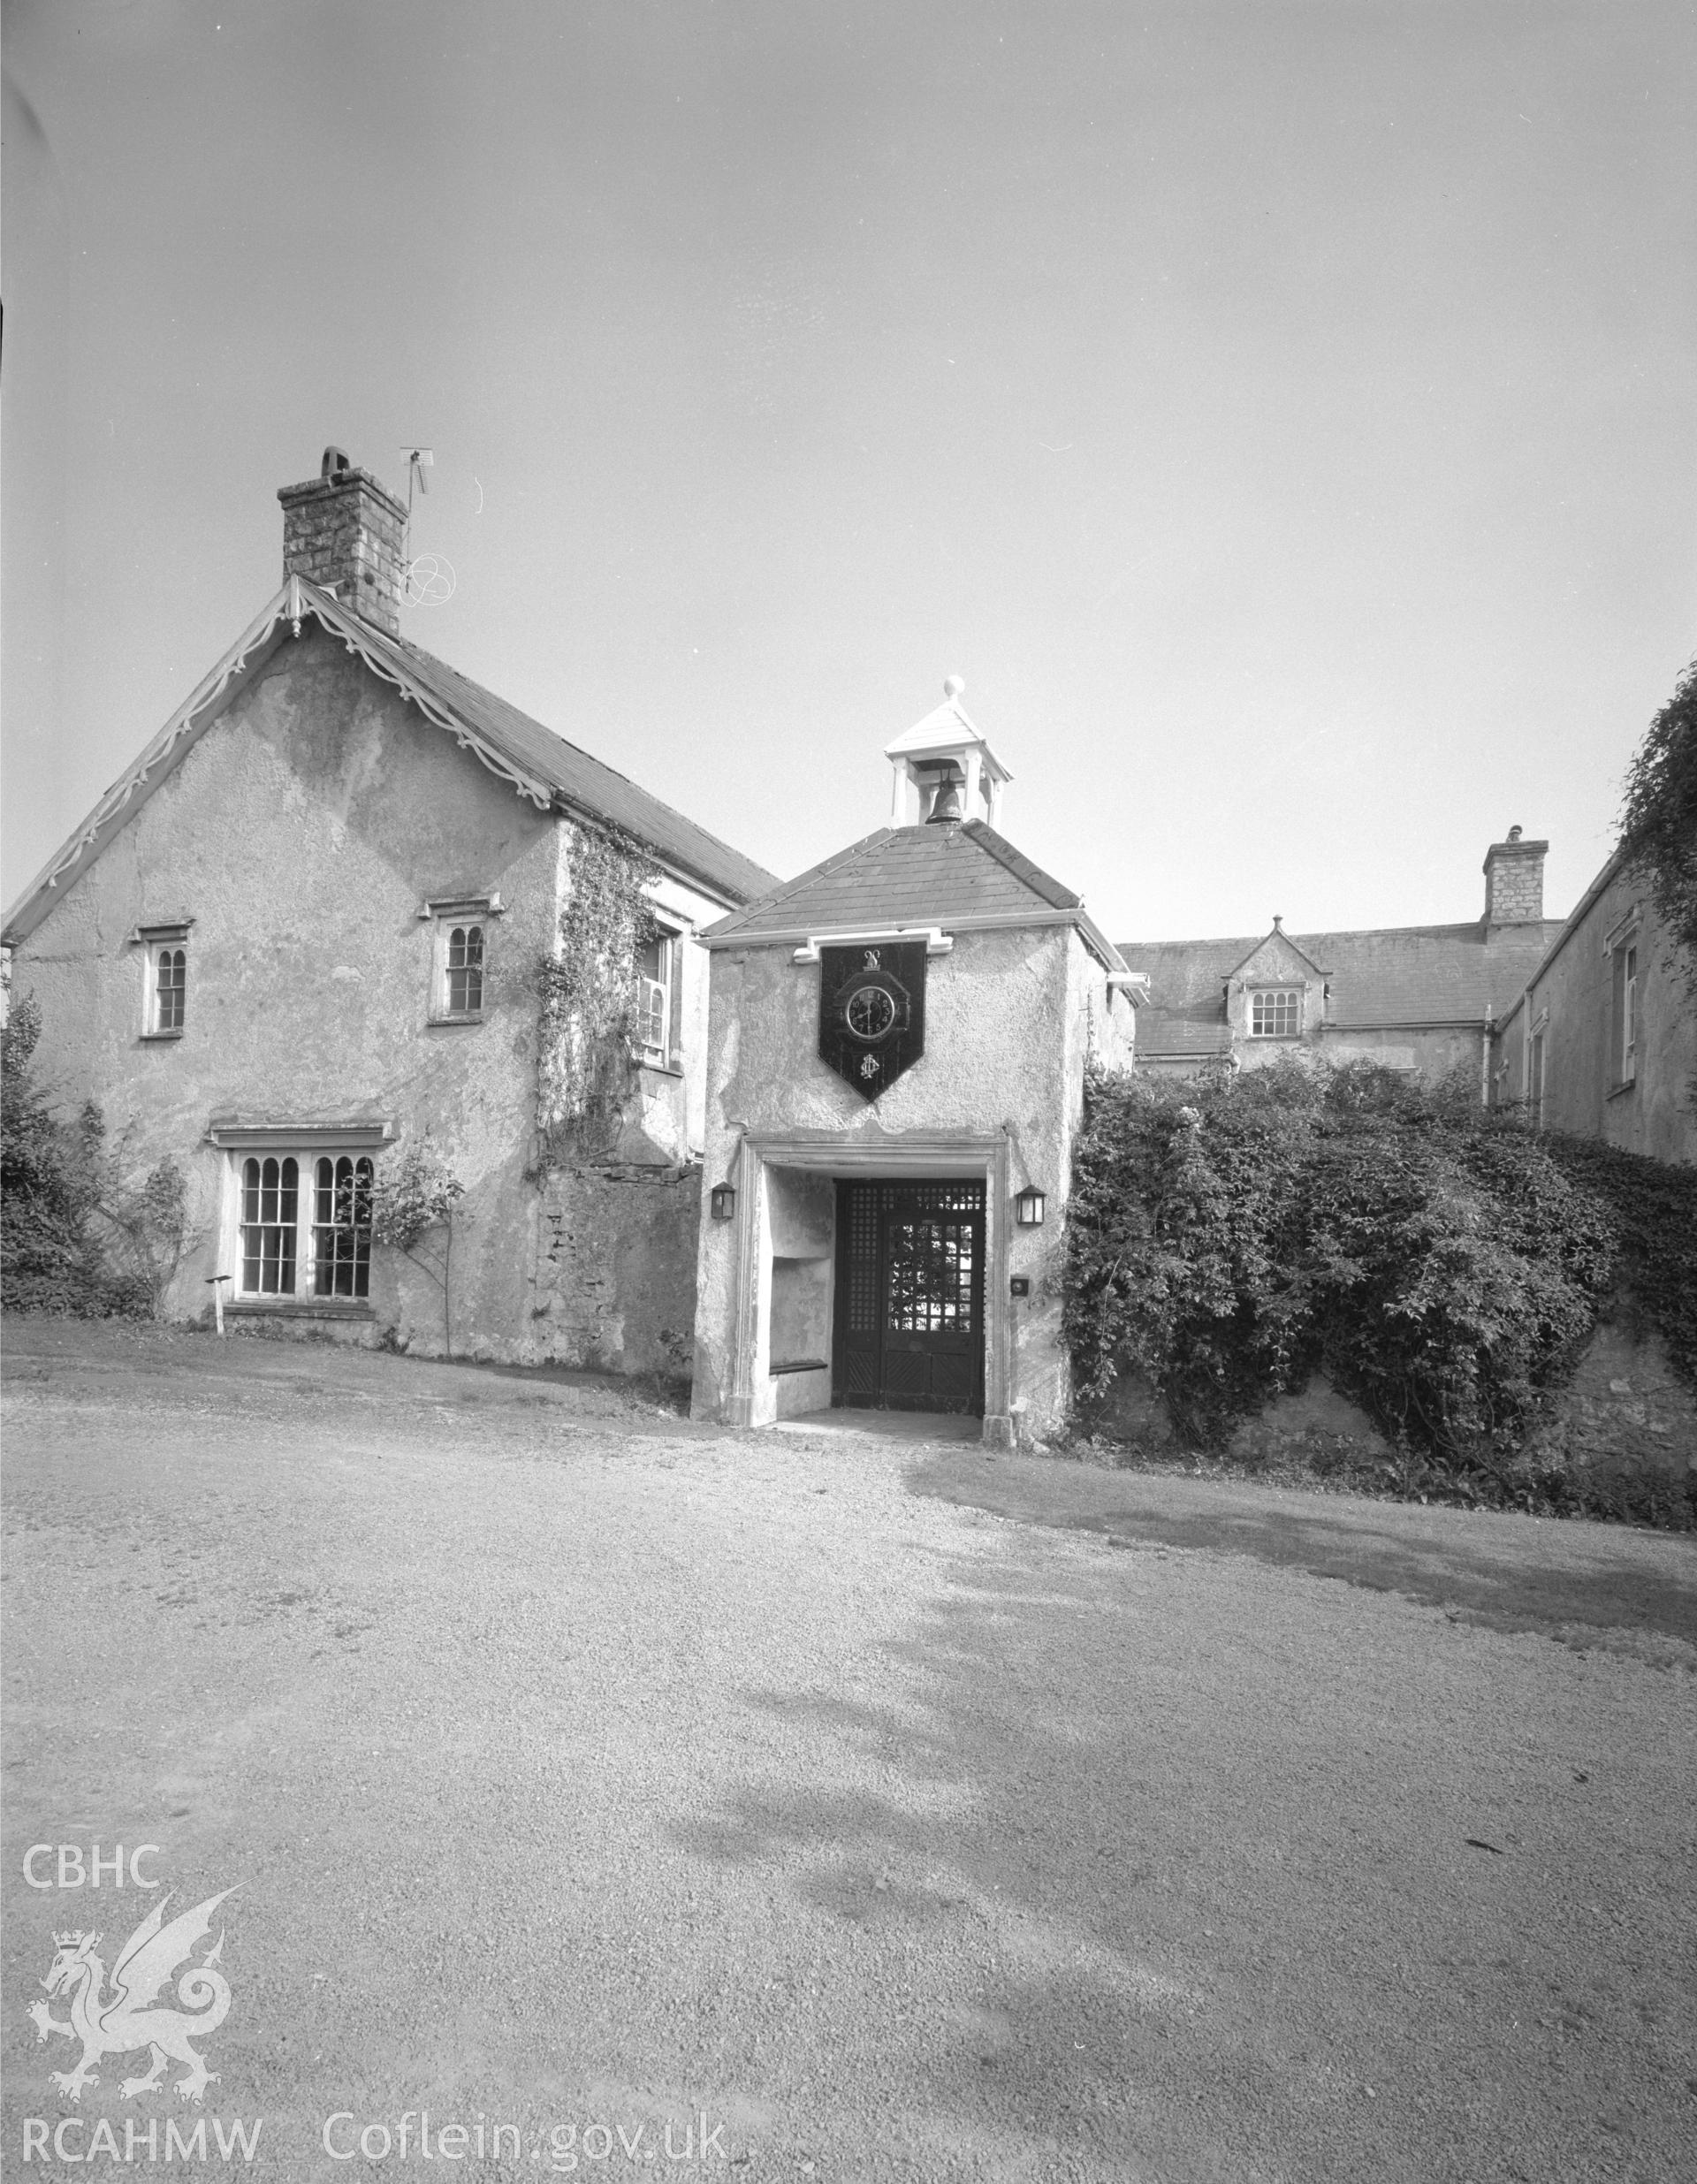 Black and white acetate negative showing exterior view of Boverton.